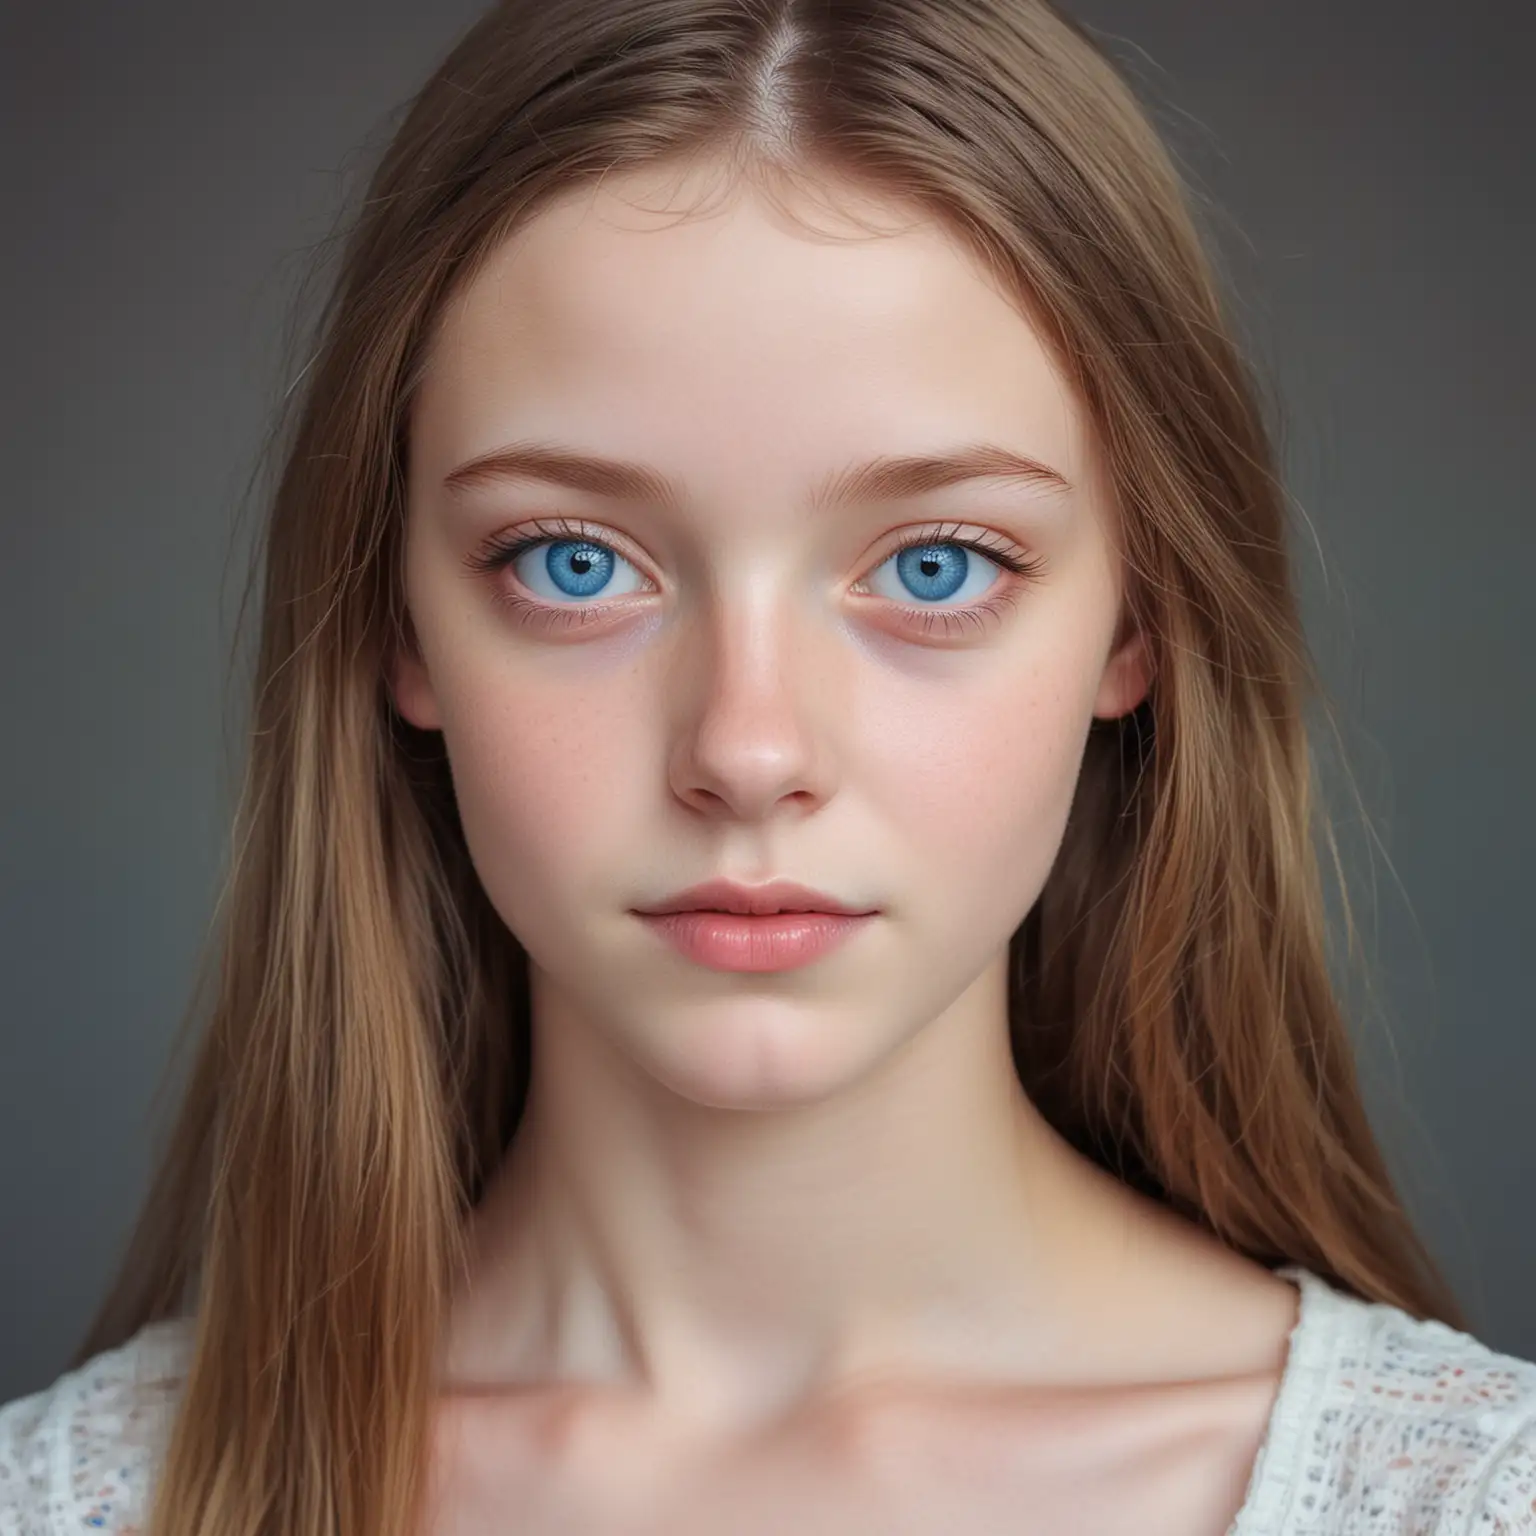 Pale-Teen-Girl-with-Blue-Eyes-Delicate-Portrait-of-a-Youthful-Teenager